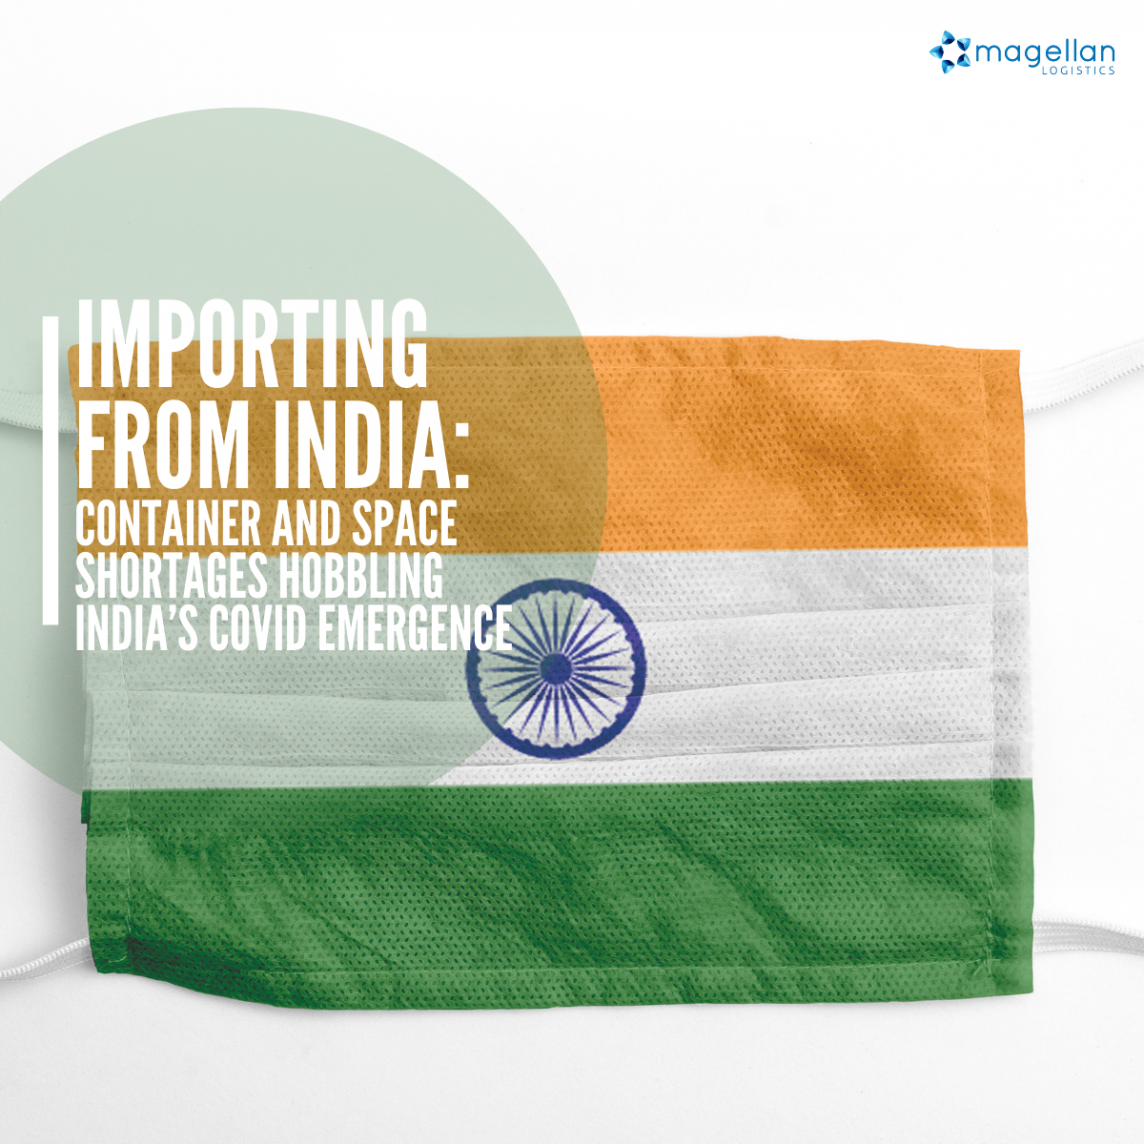 Importing from India: Space shortages hobble India’s re-emergence